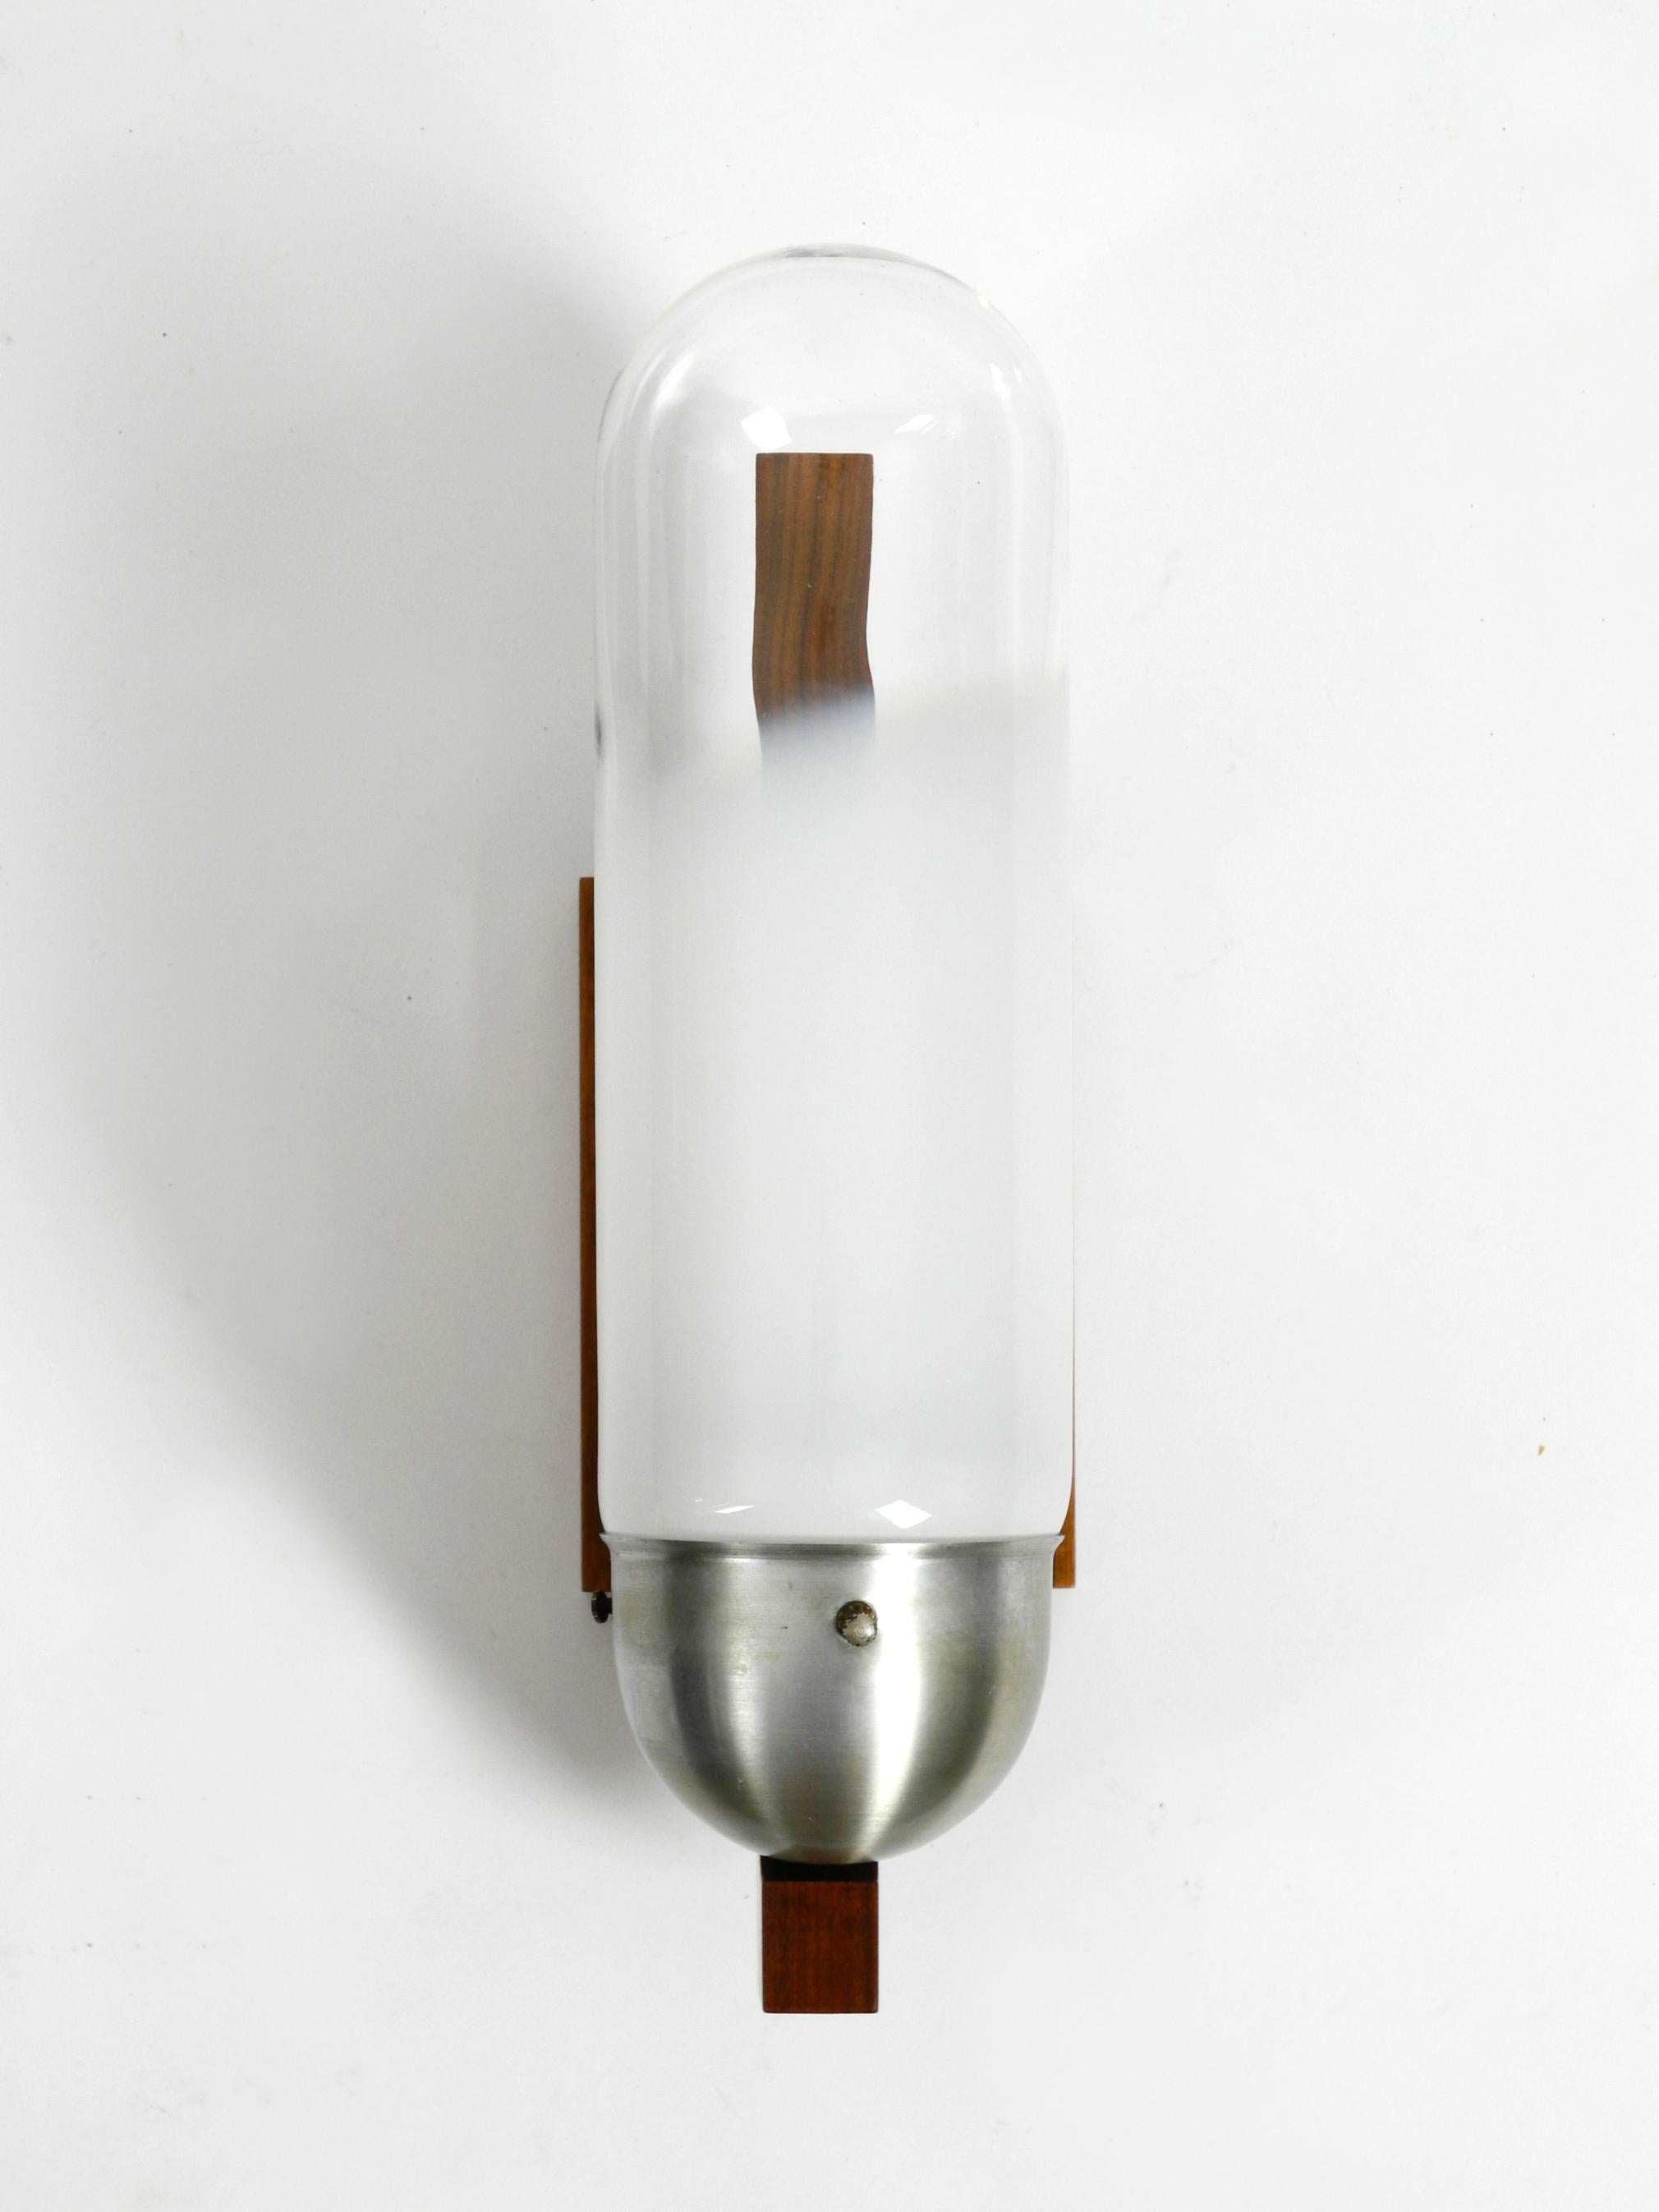 Rare Mid-Century Modern Wood Wall Lamp with Glass Shade in Art Deco Design  3